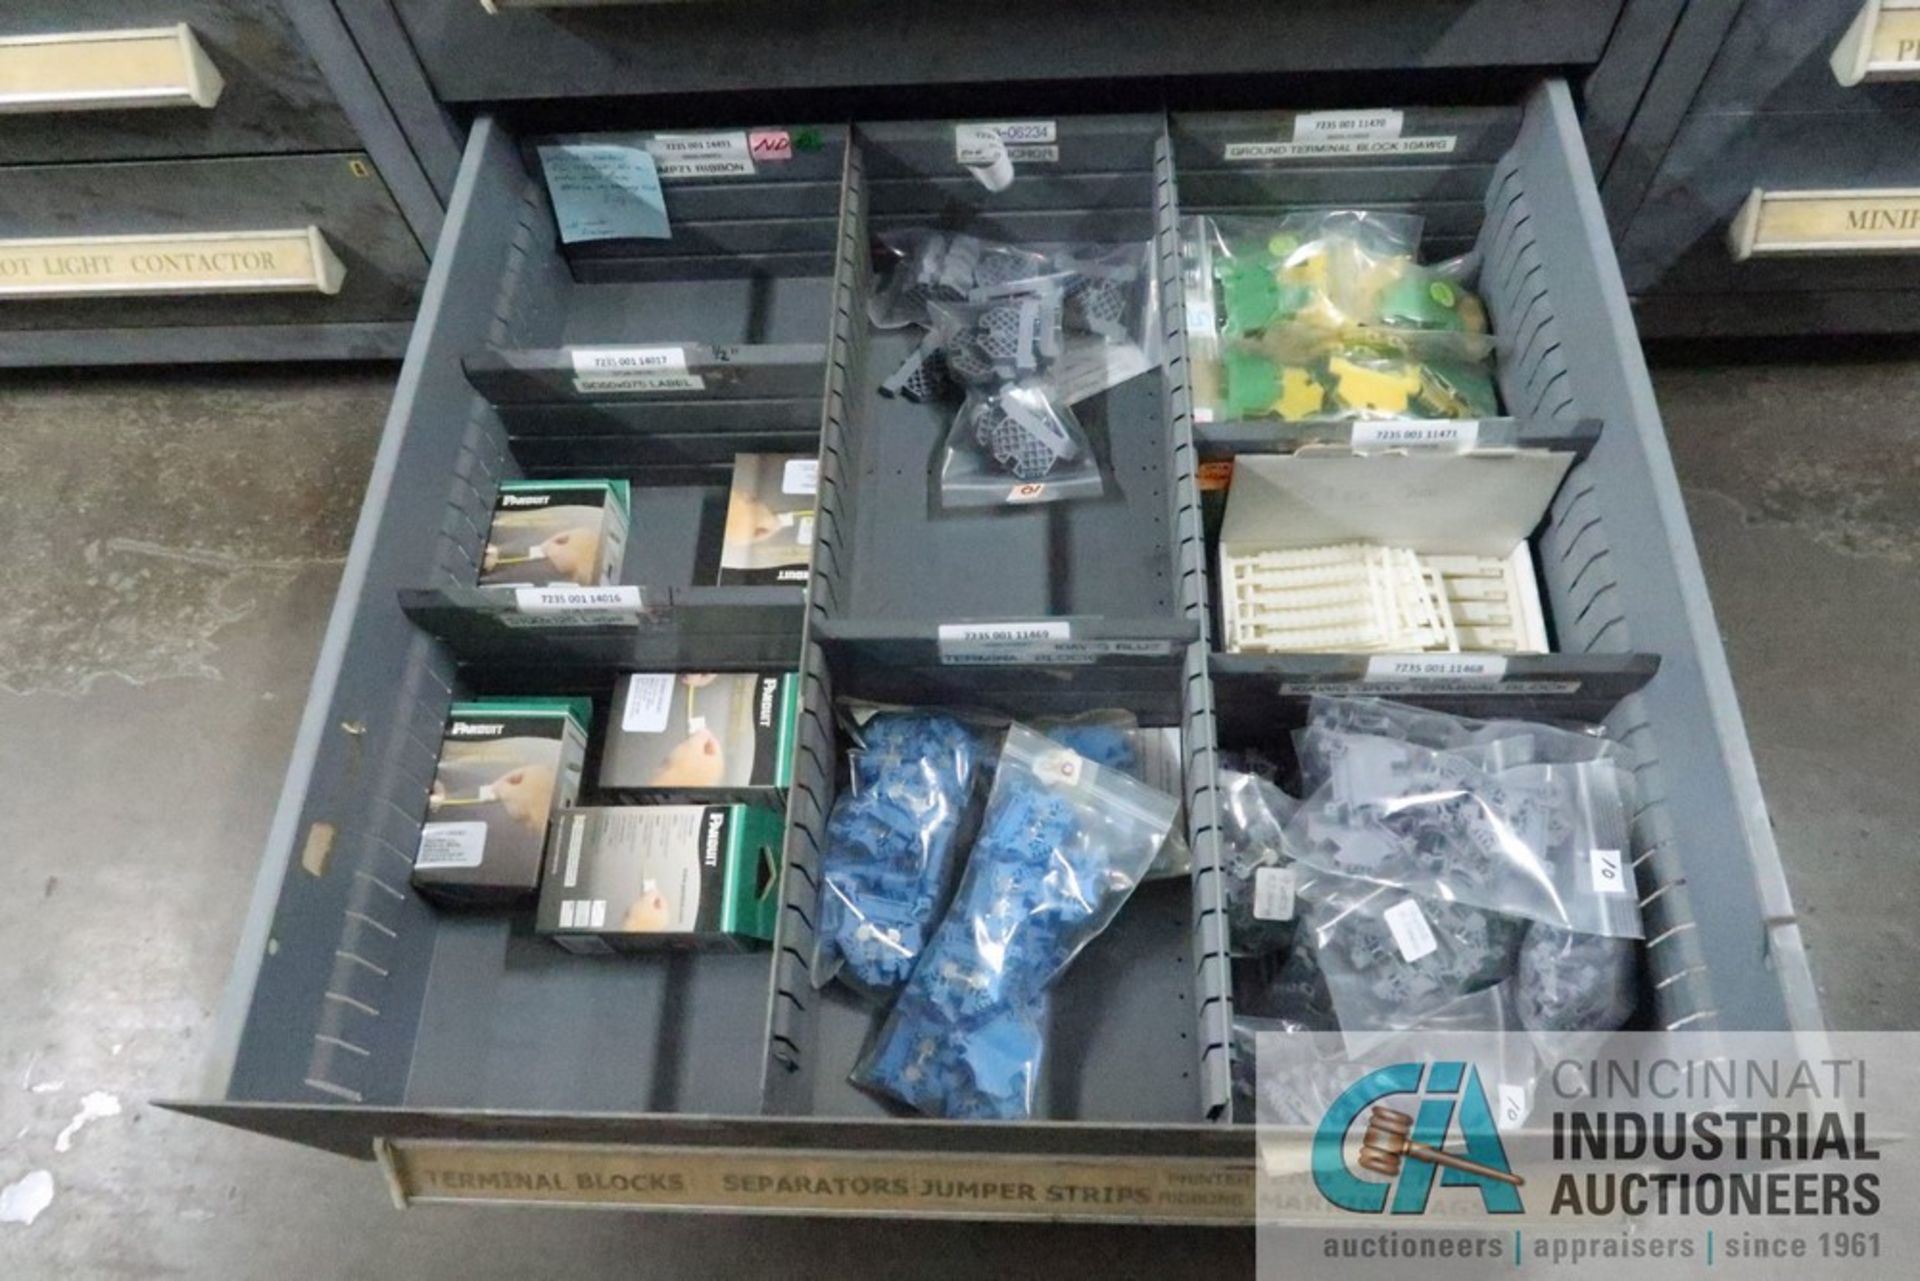 9-DRAWER LISTA CABINET WITH CONTENTS INCLUDING MISCELLANEOUS GAS VALVES, IGNITERS, SWITCHES, PHOTO - Image 10 of 10